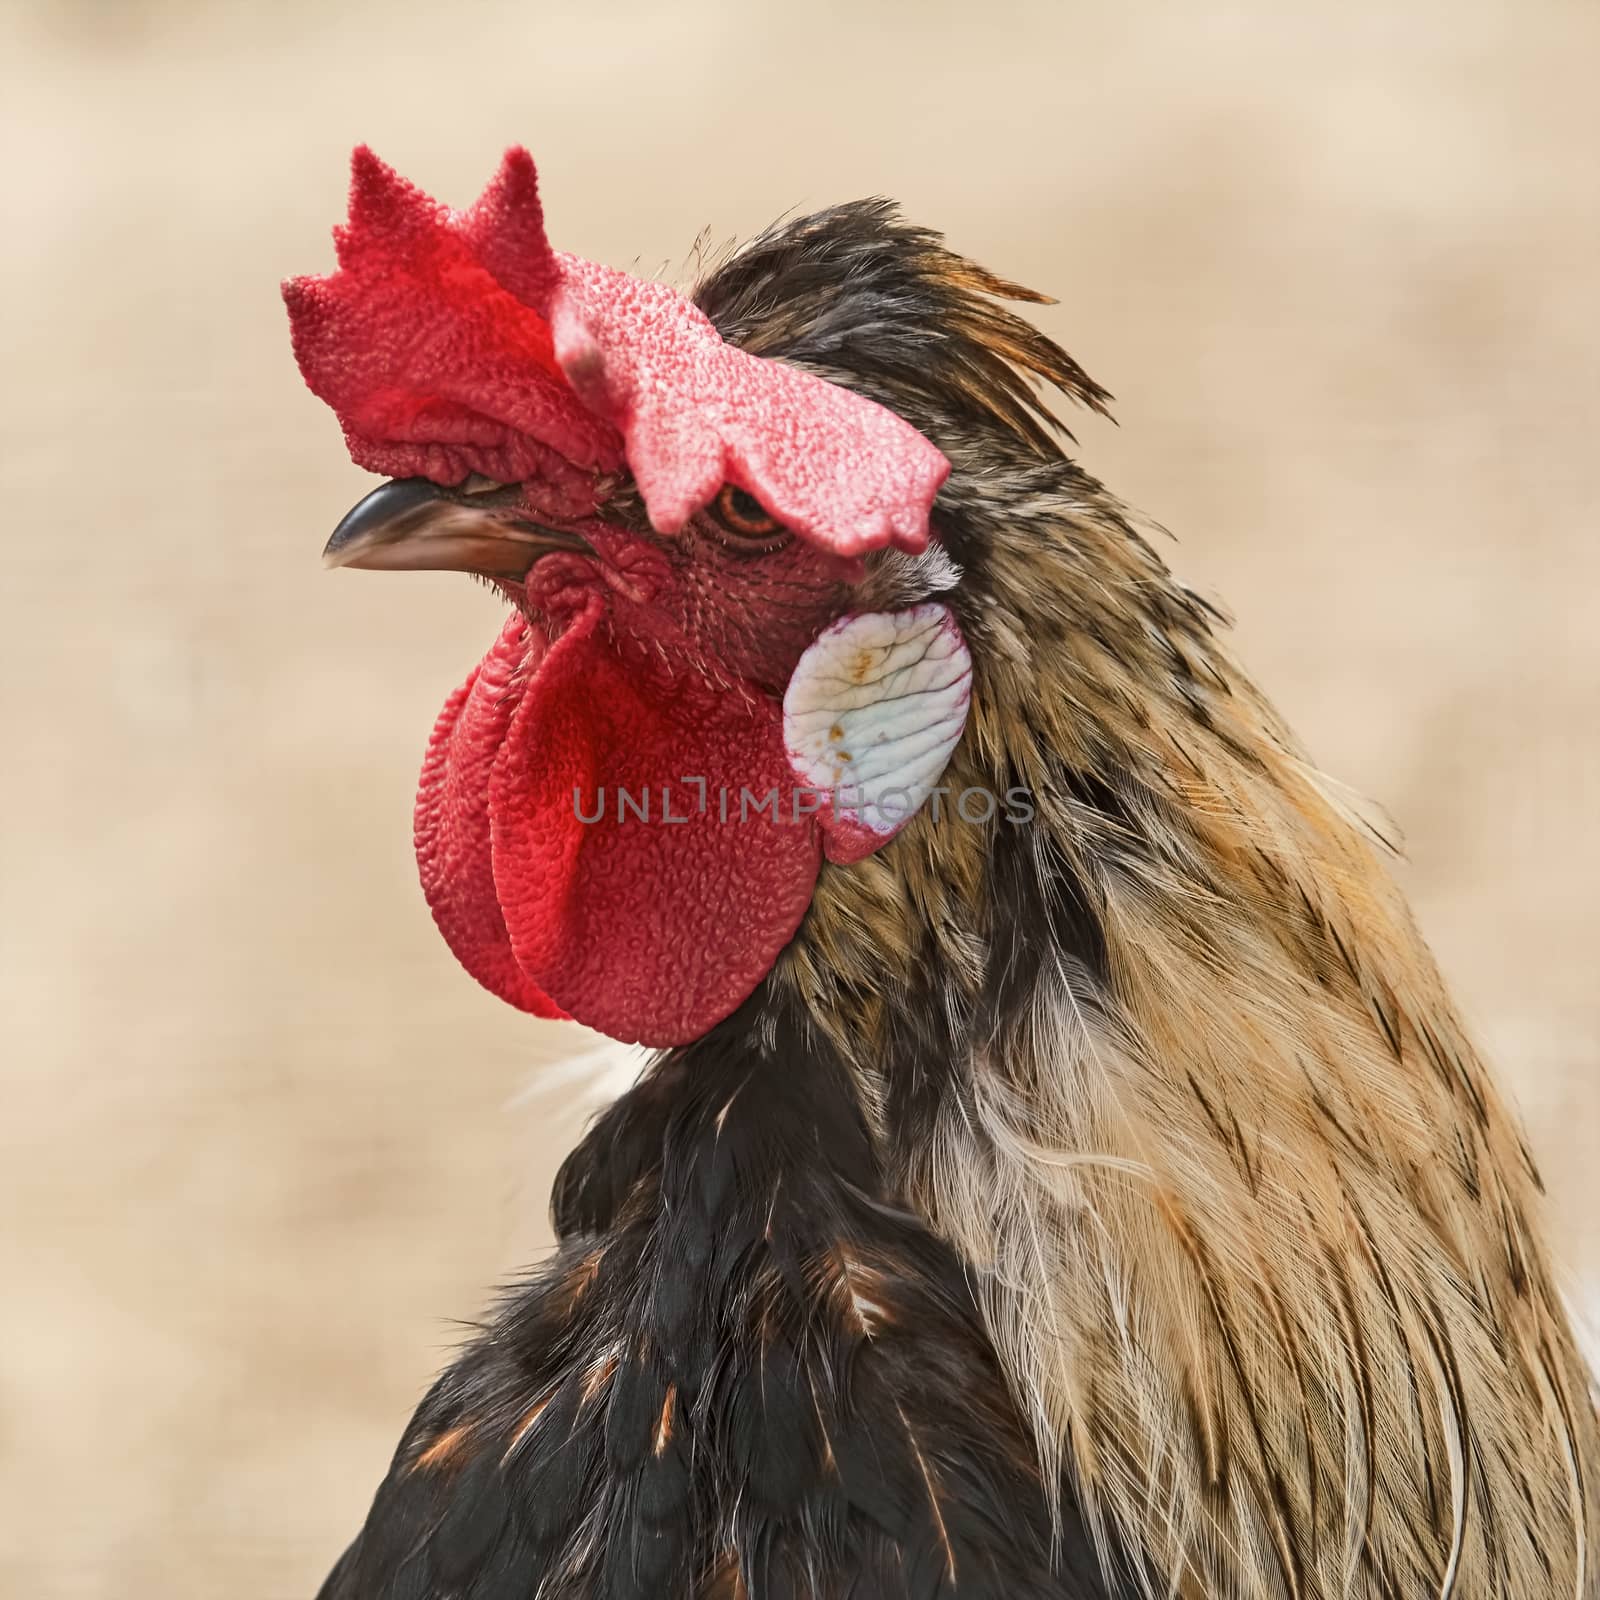 Portrait of Rooster by SNR